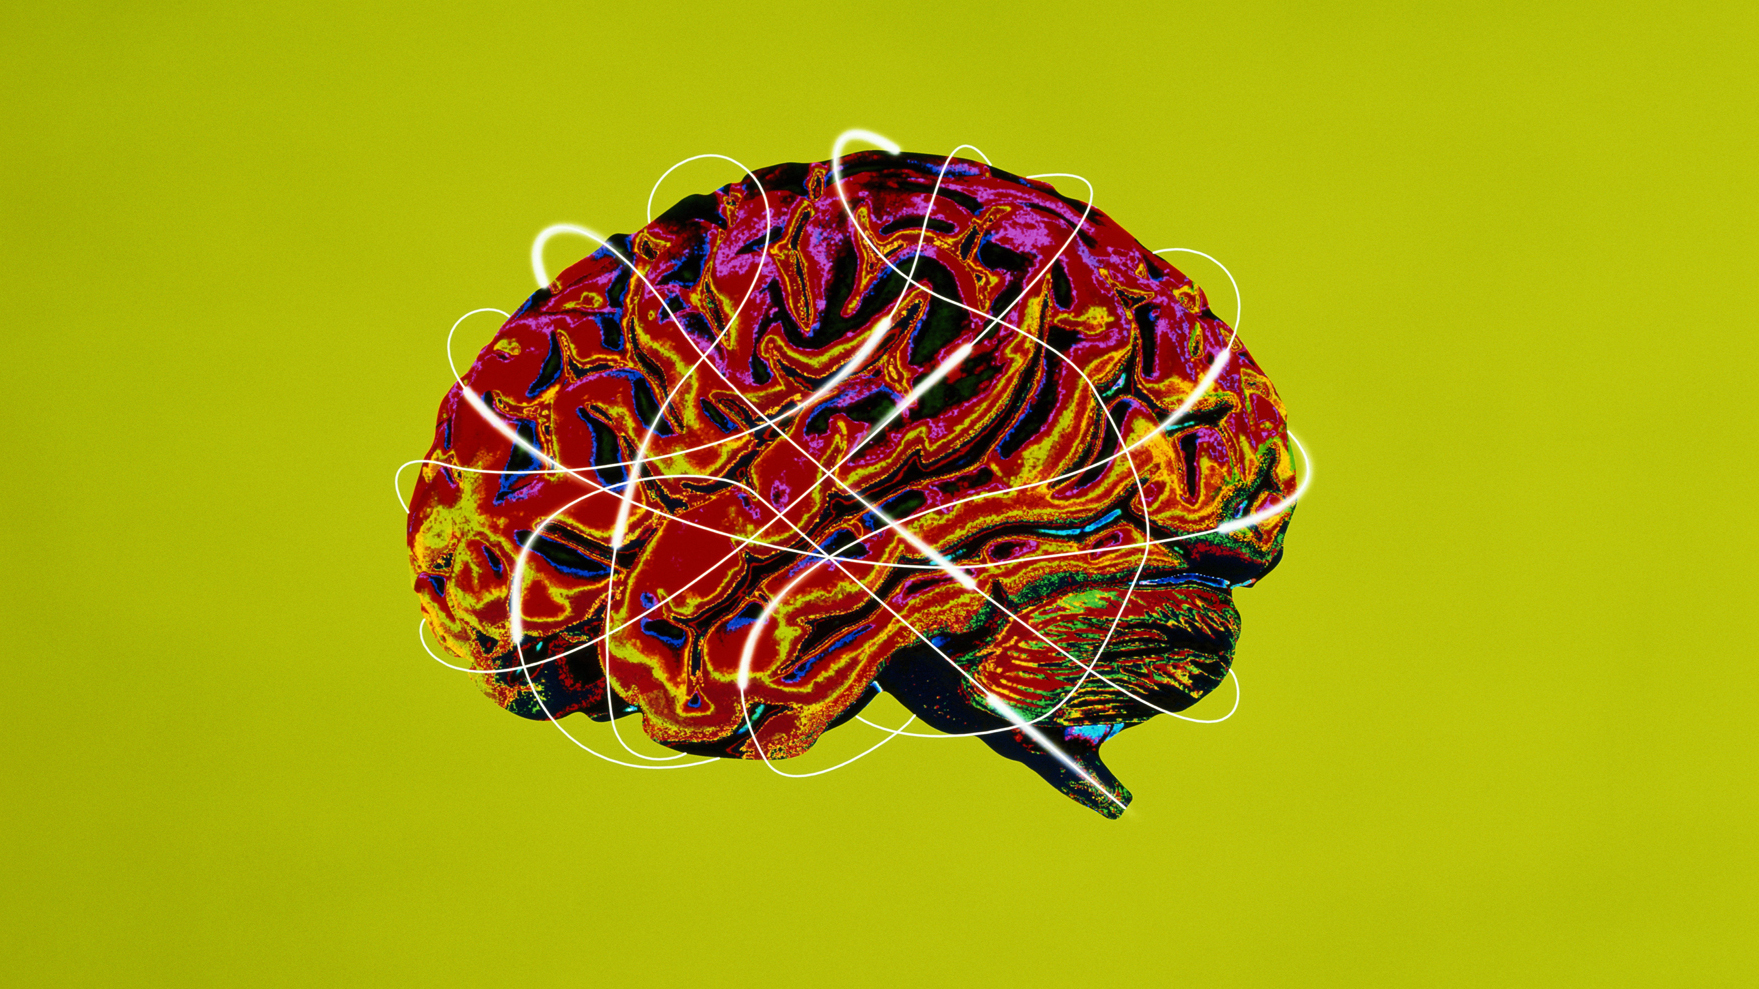 An illustration of brain activity is seen on a green background.